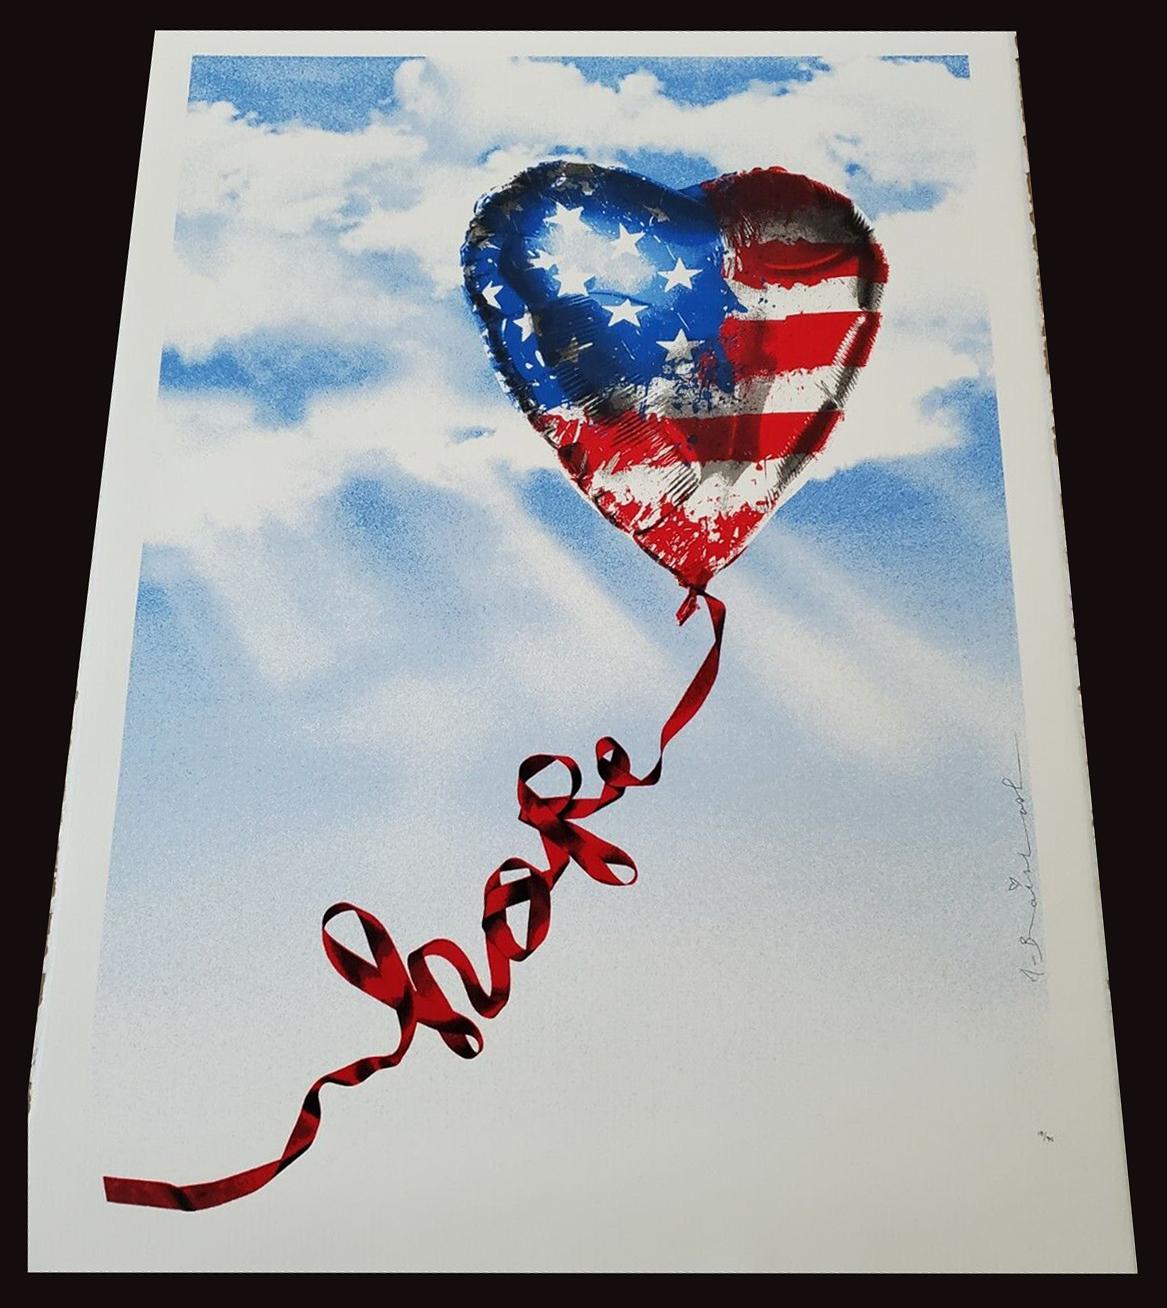 MR. BRAINWASH INDEPENDENCE DAY 'HOPE' AMERICAN FLAG - SIGNED NUMBERED - Print by Mr. Brainwash